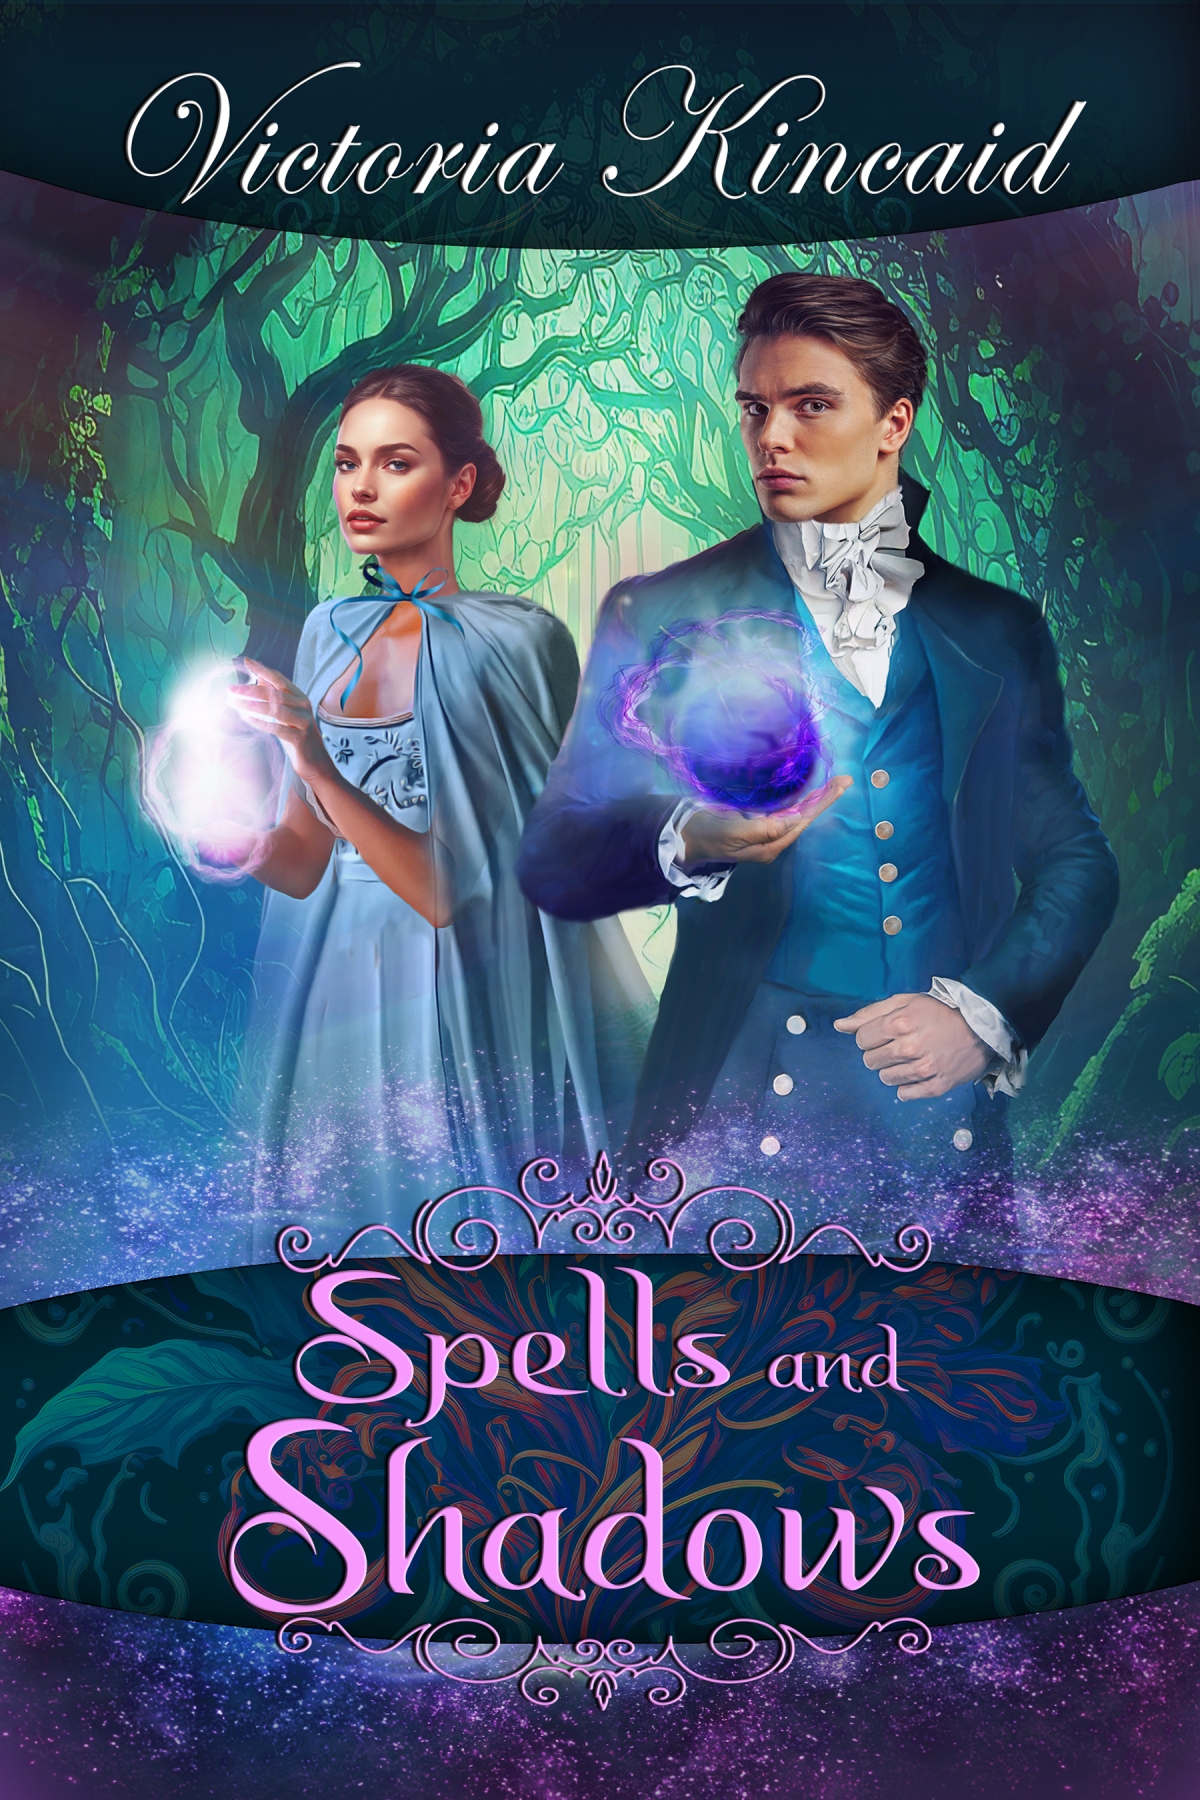 “Spells and Shadows” by Victoria Kincaid, excerpt + giveaway